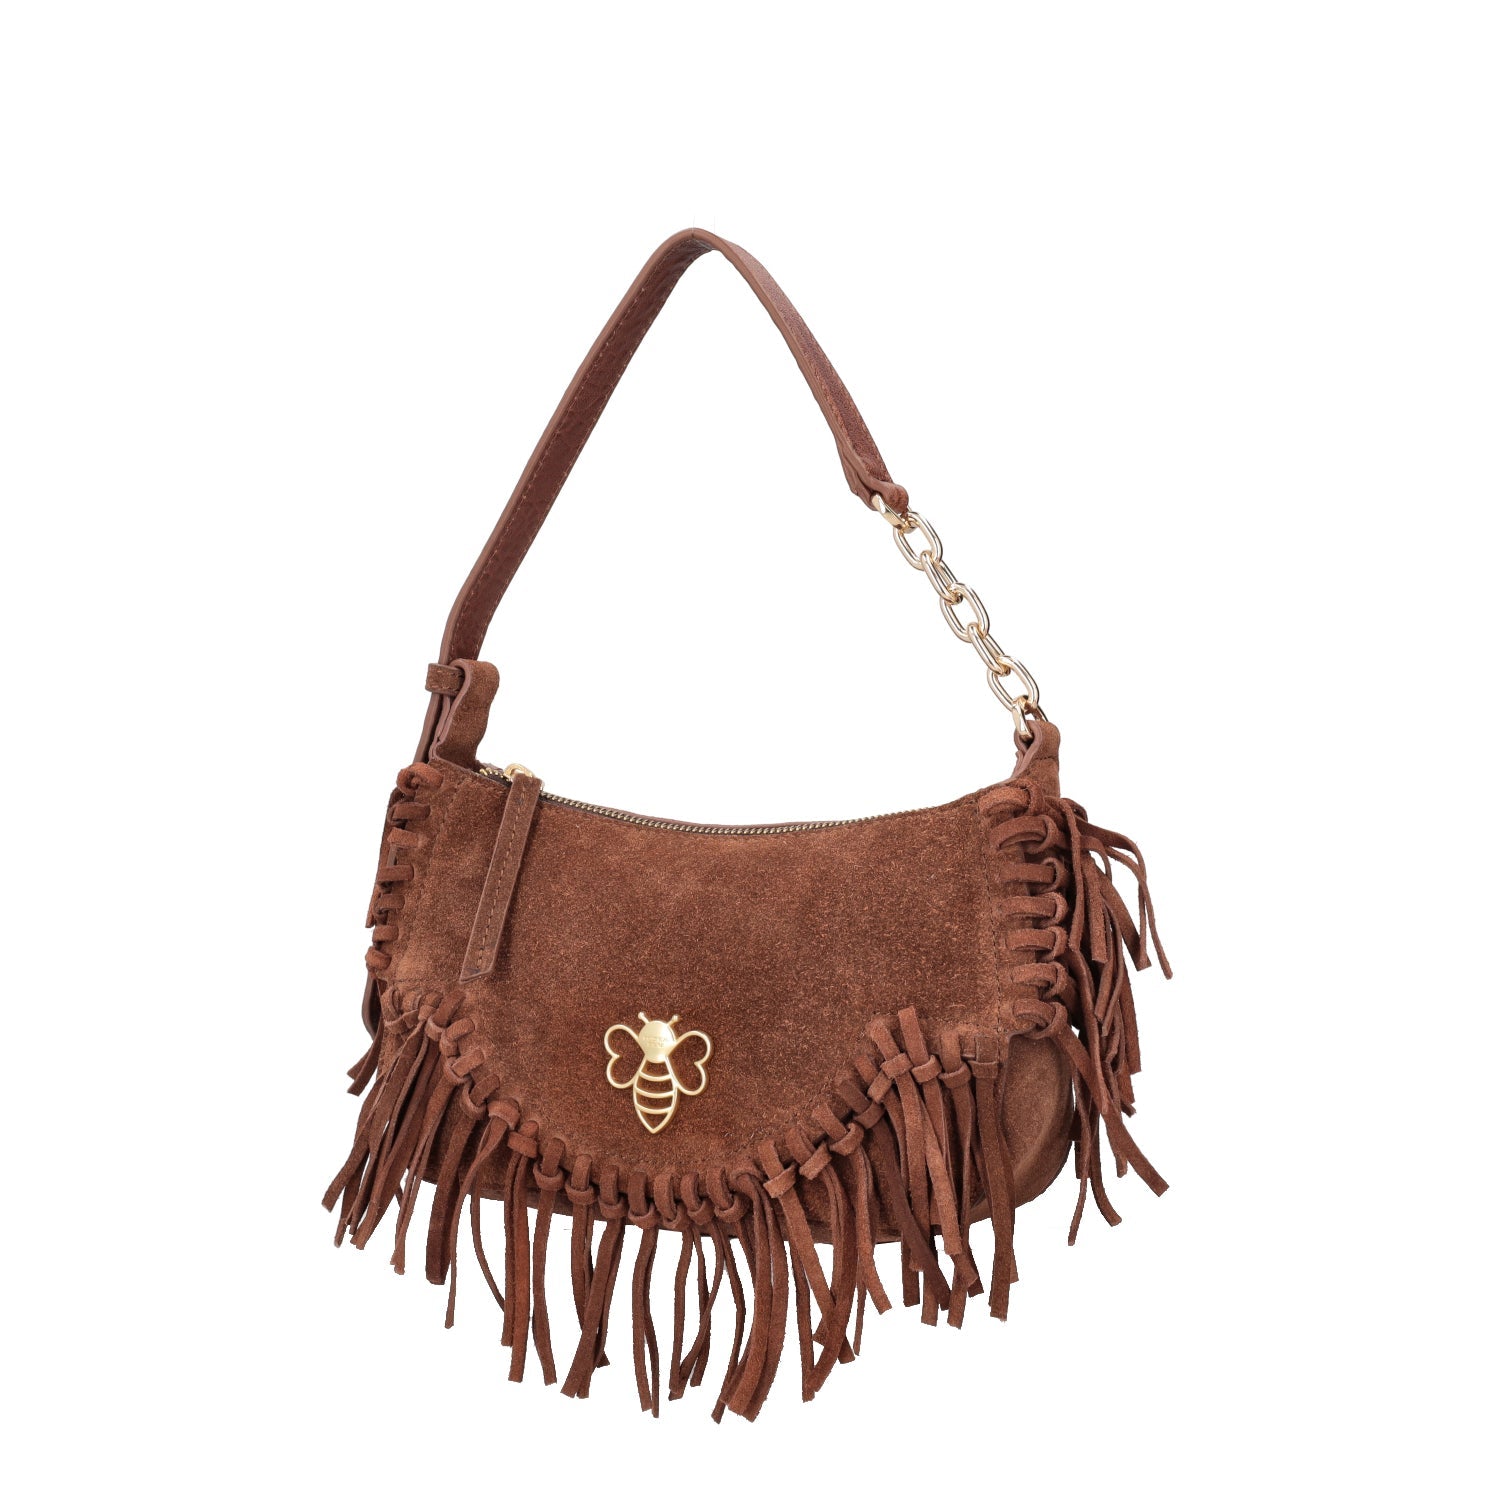 TAN LILIUM CROSSBODY BAG IN SUEDE WITH FRINGES